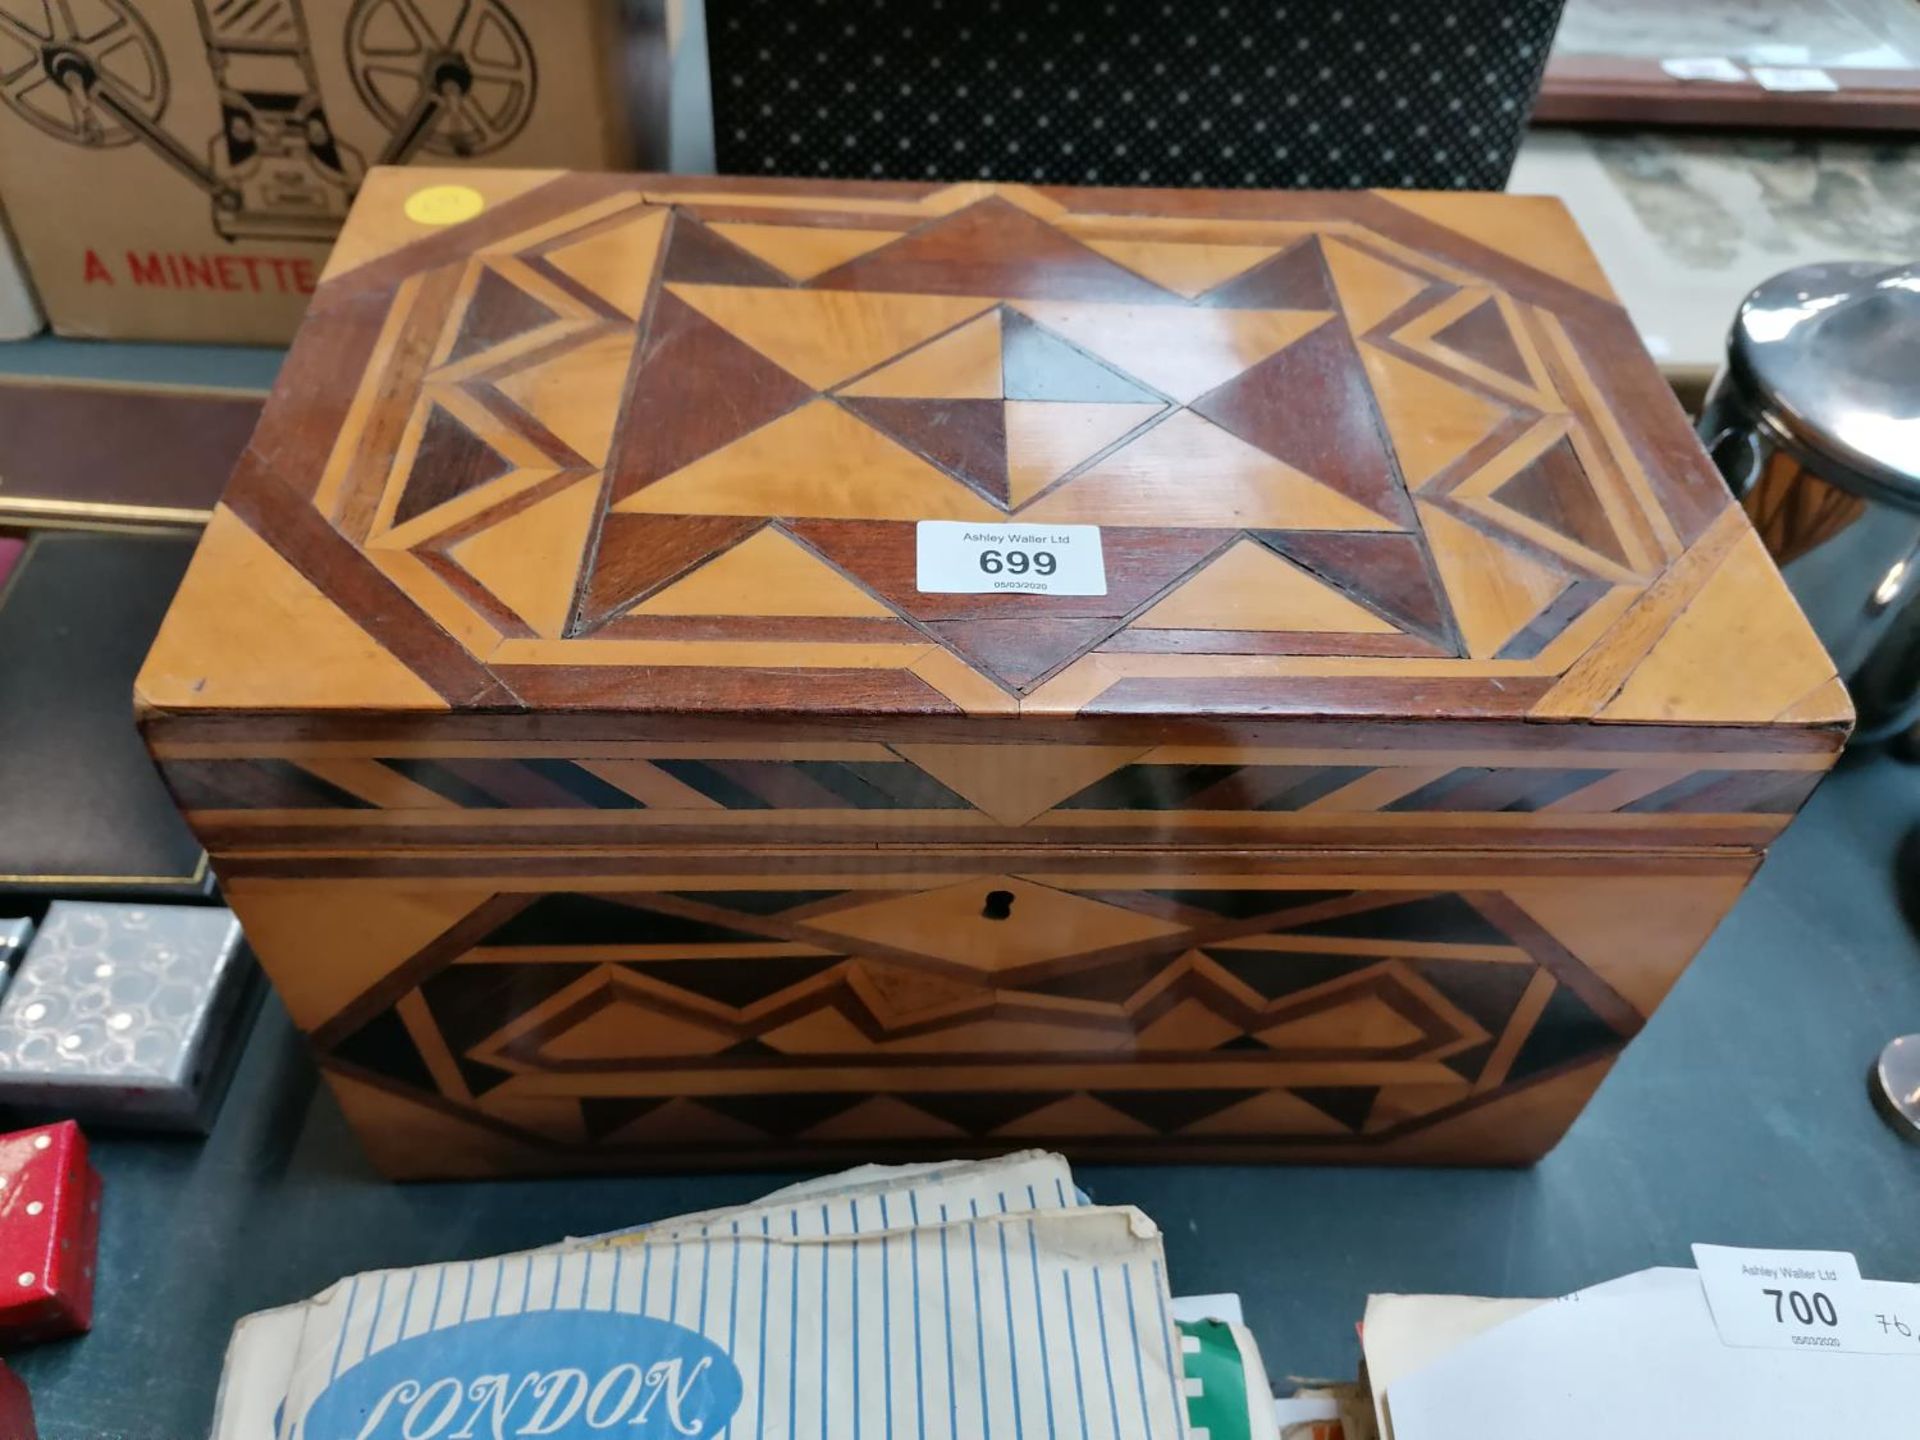 A VINTAGE MARQUETRY DESIGN WOODEN JEWELLERY BOX